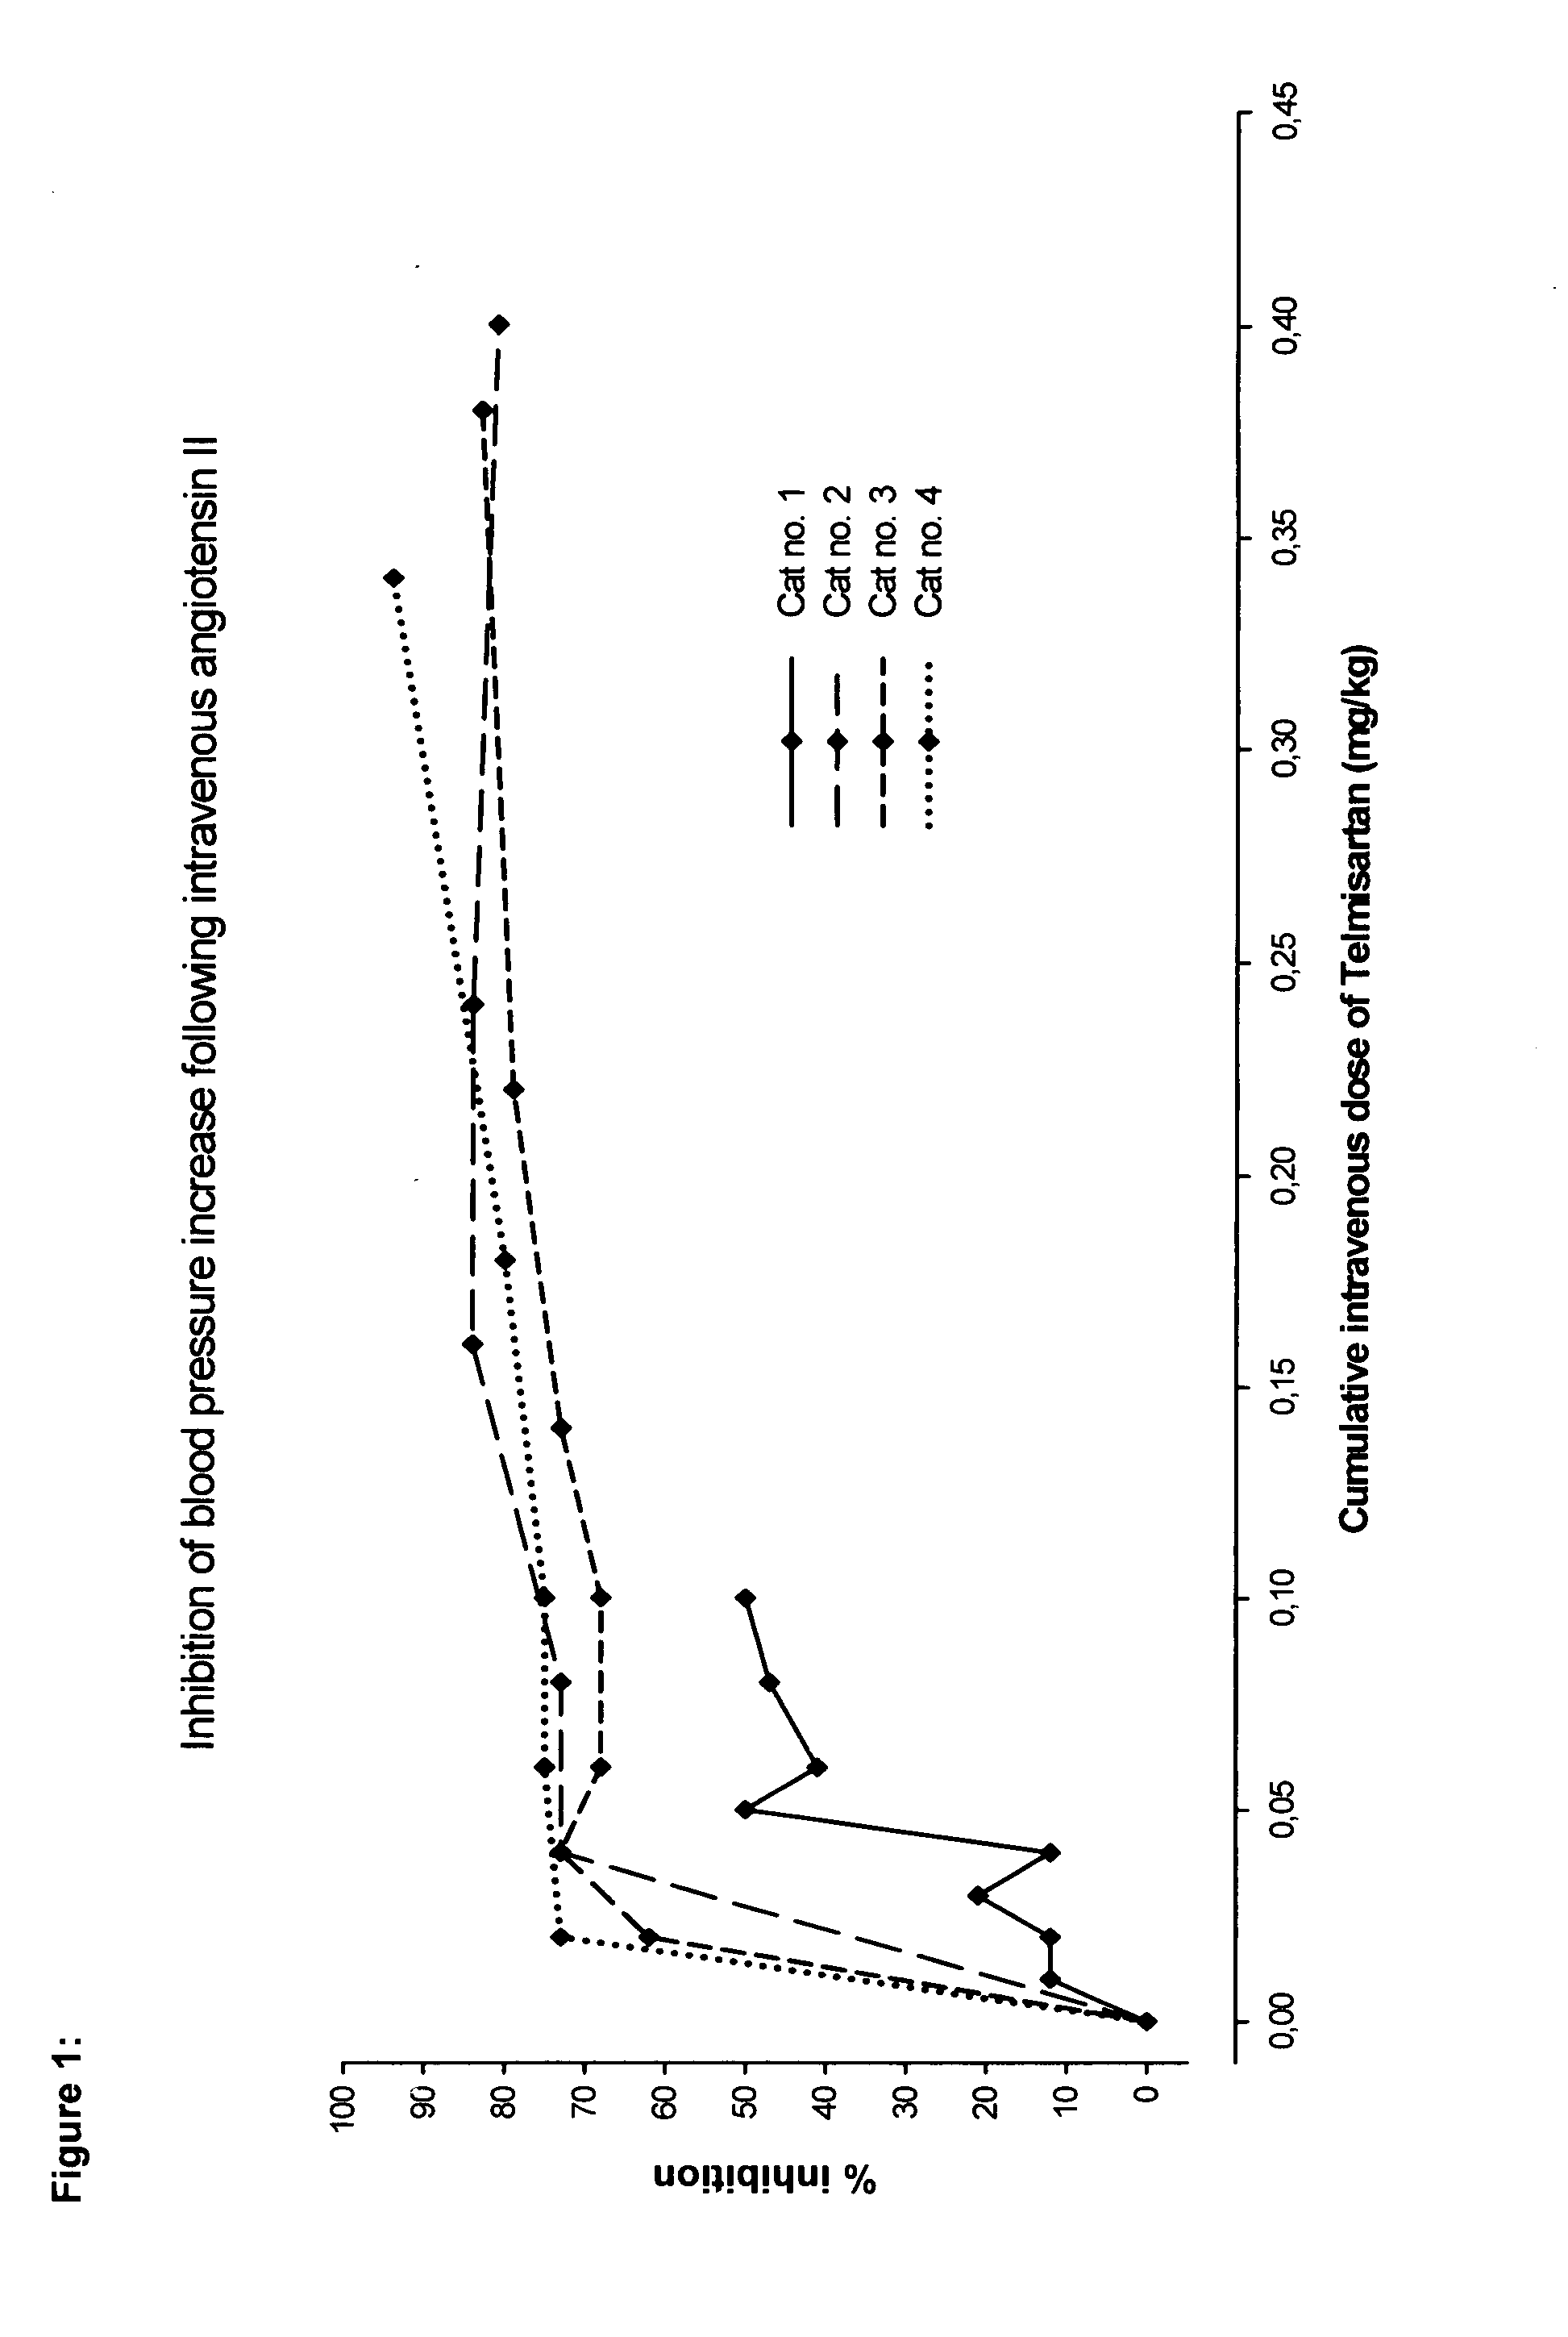 Angiotensin II receptor antagonist for the prevention or treatment of systemic diseases in cats